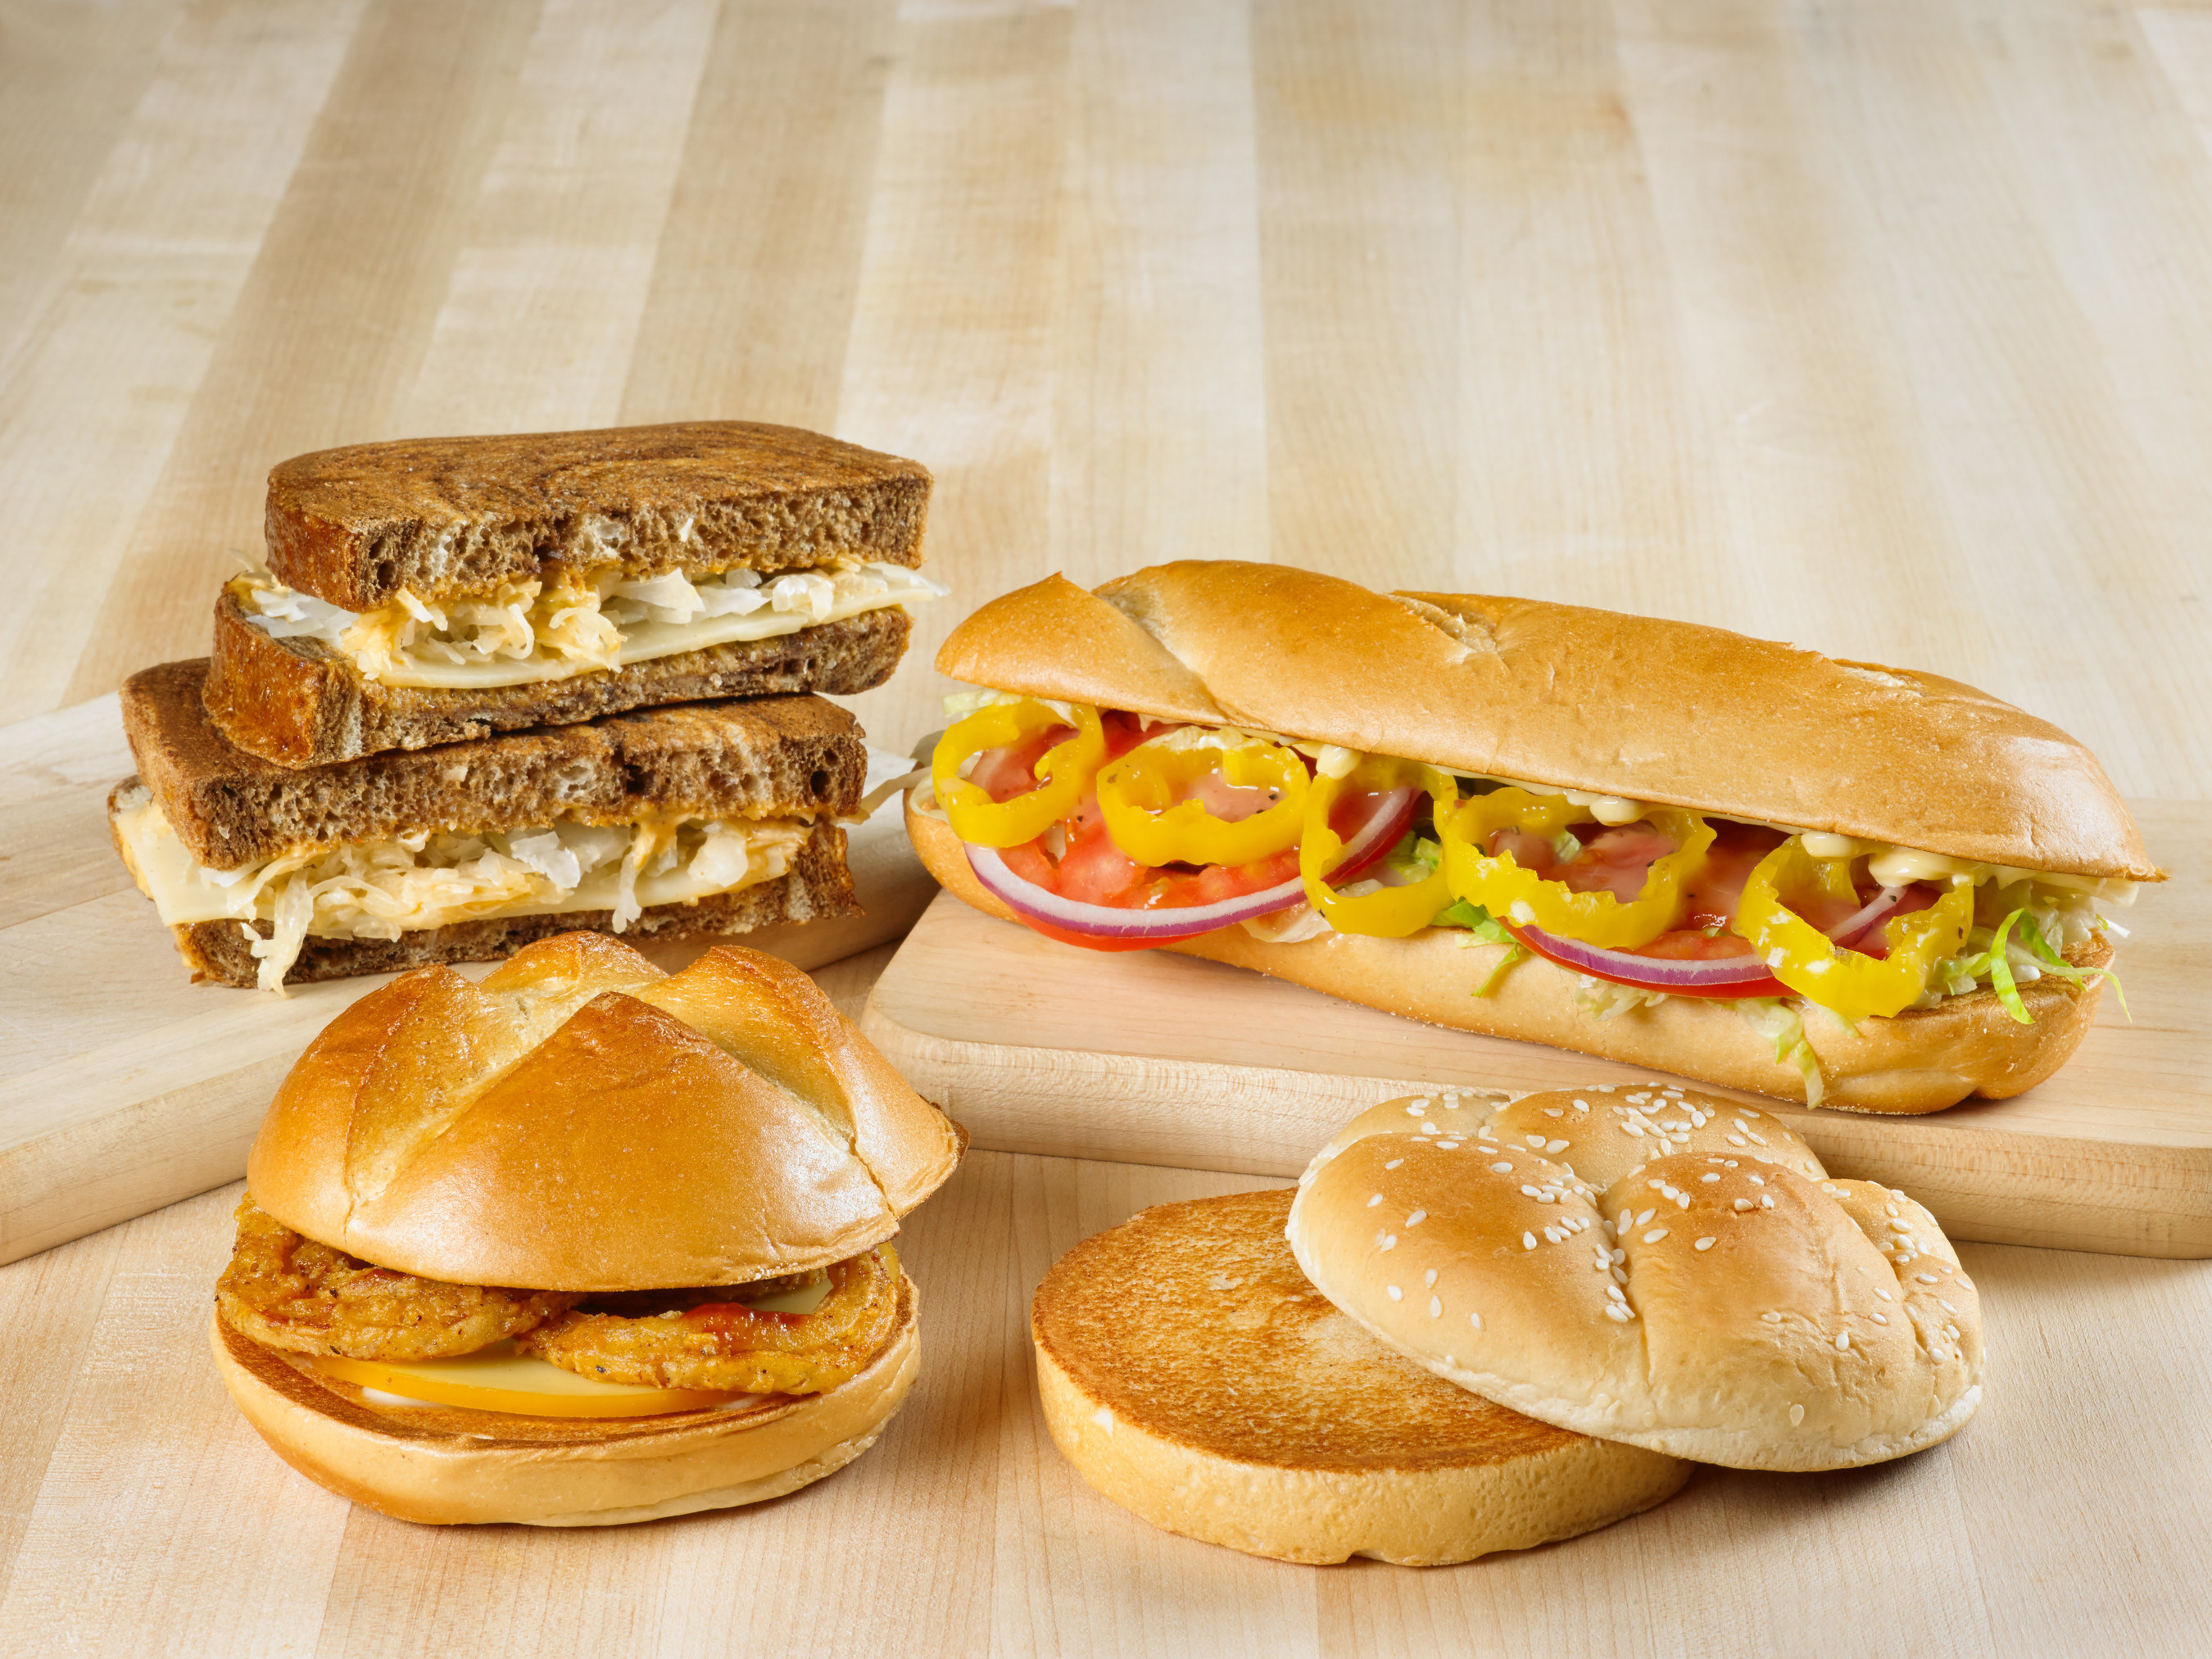 Available on Feb. 29 only, Arby's meatless menu is extensive and void of delicious, quality proteins.